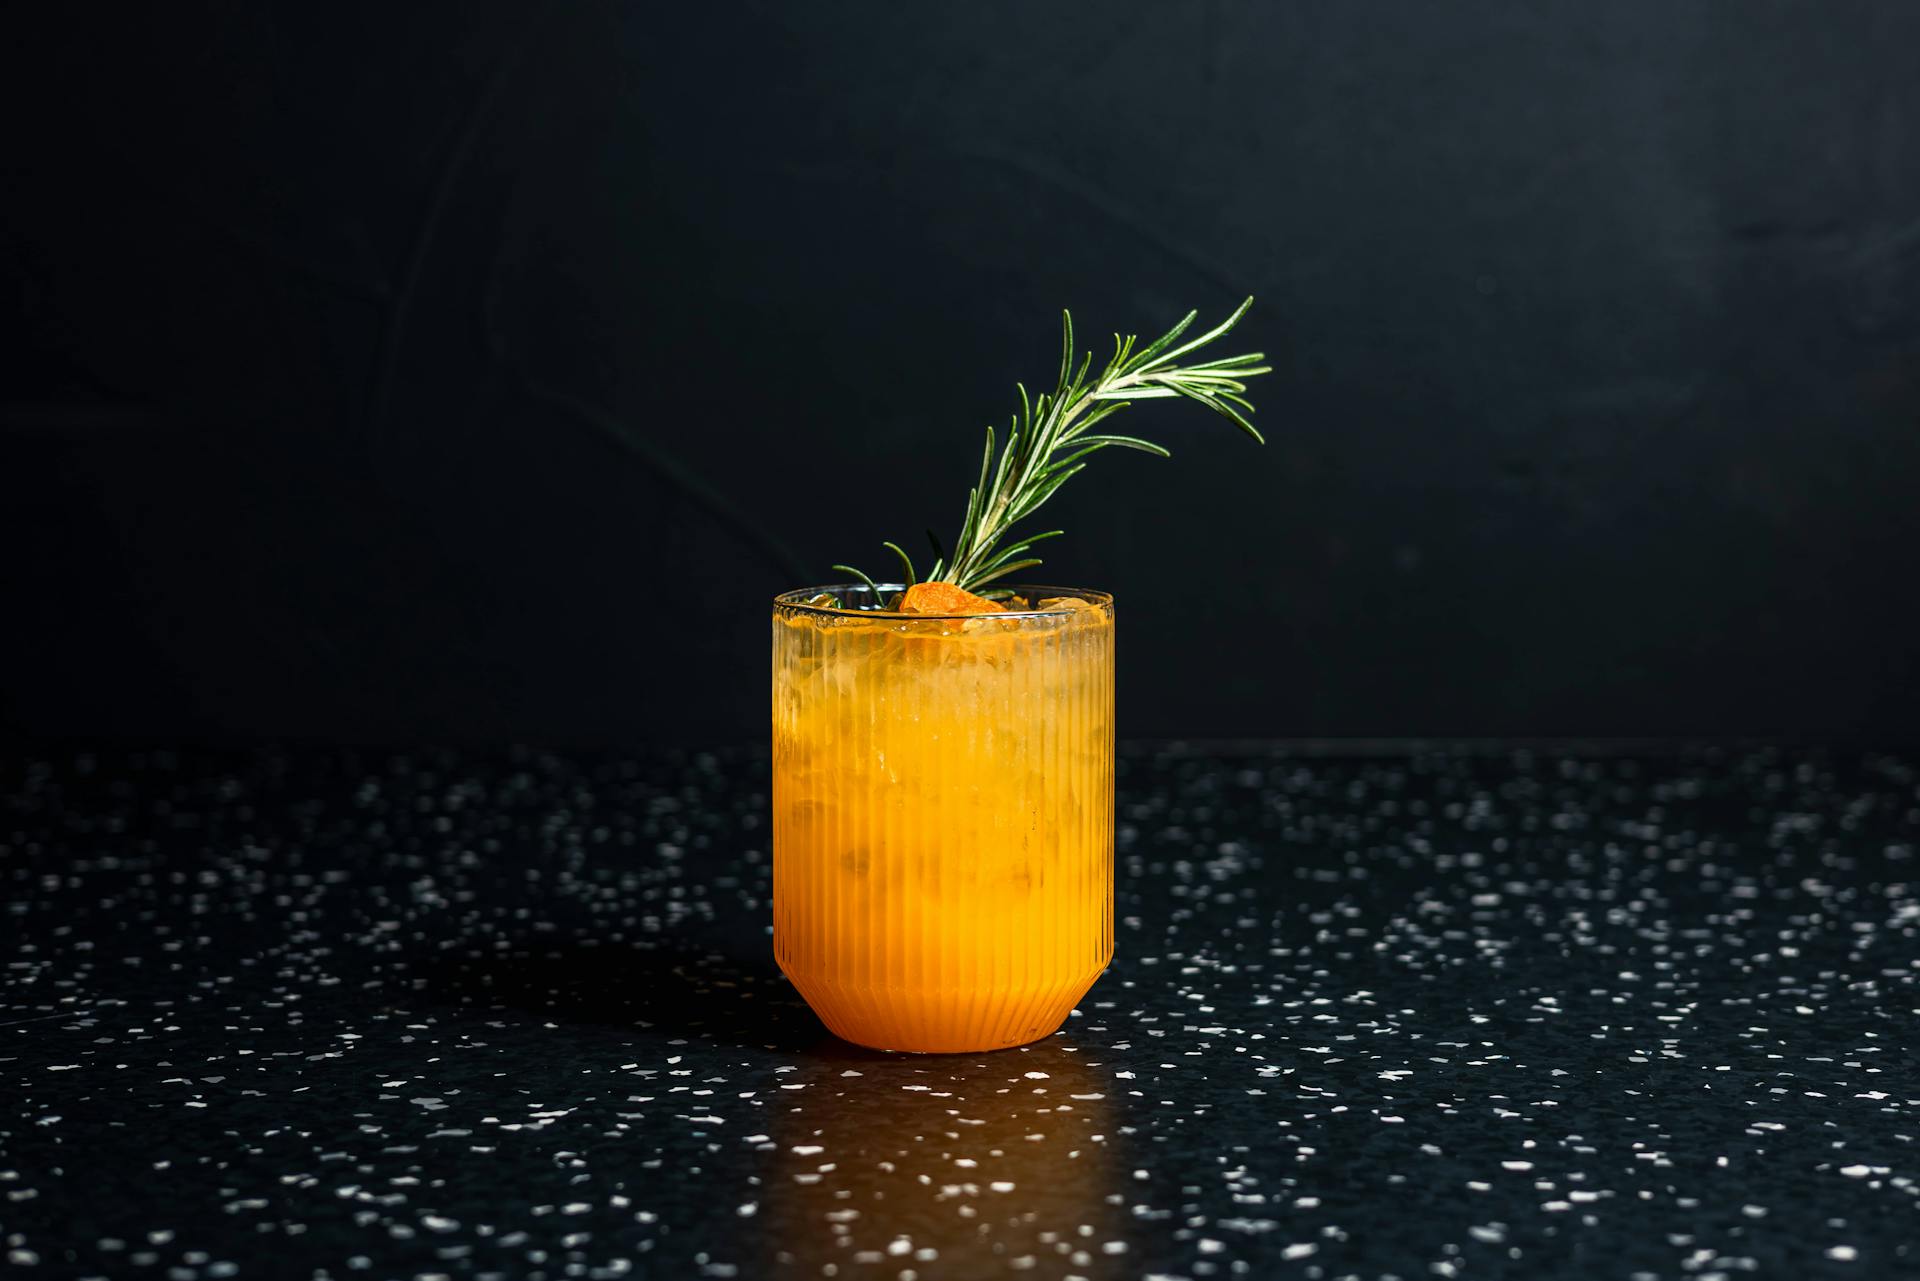 <p>Pump up the jam!</p>
<p>Base: Tanqueray gin infused with apricot, apricot pur&eacute;e, apricot juice, lime juice and rosemary syrup&nbsp;</p>